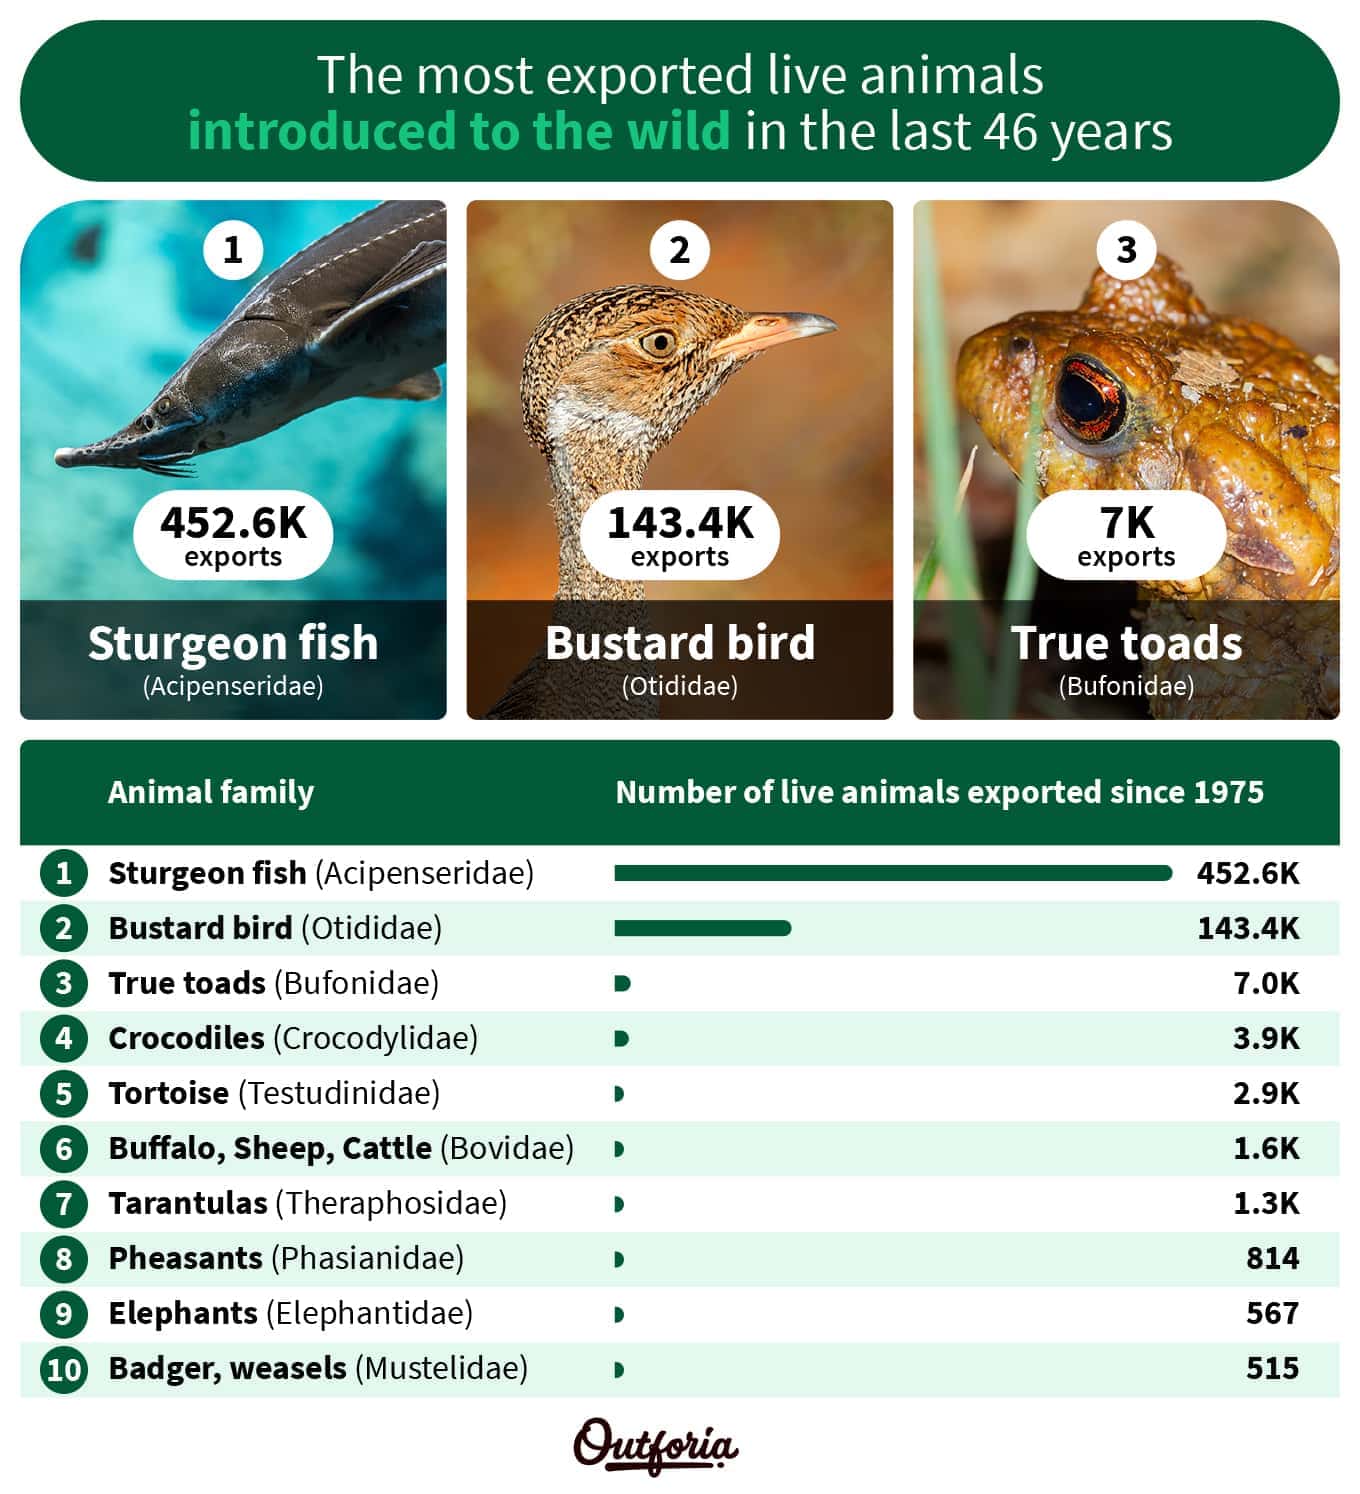 graph about the most exported live animals introduced to the wild in the last 46 years